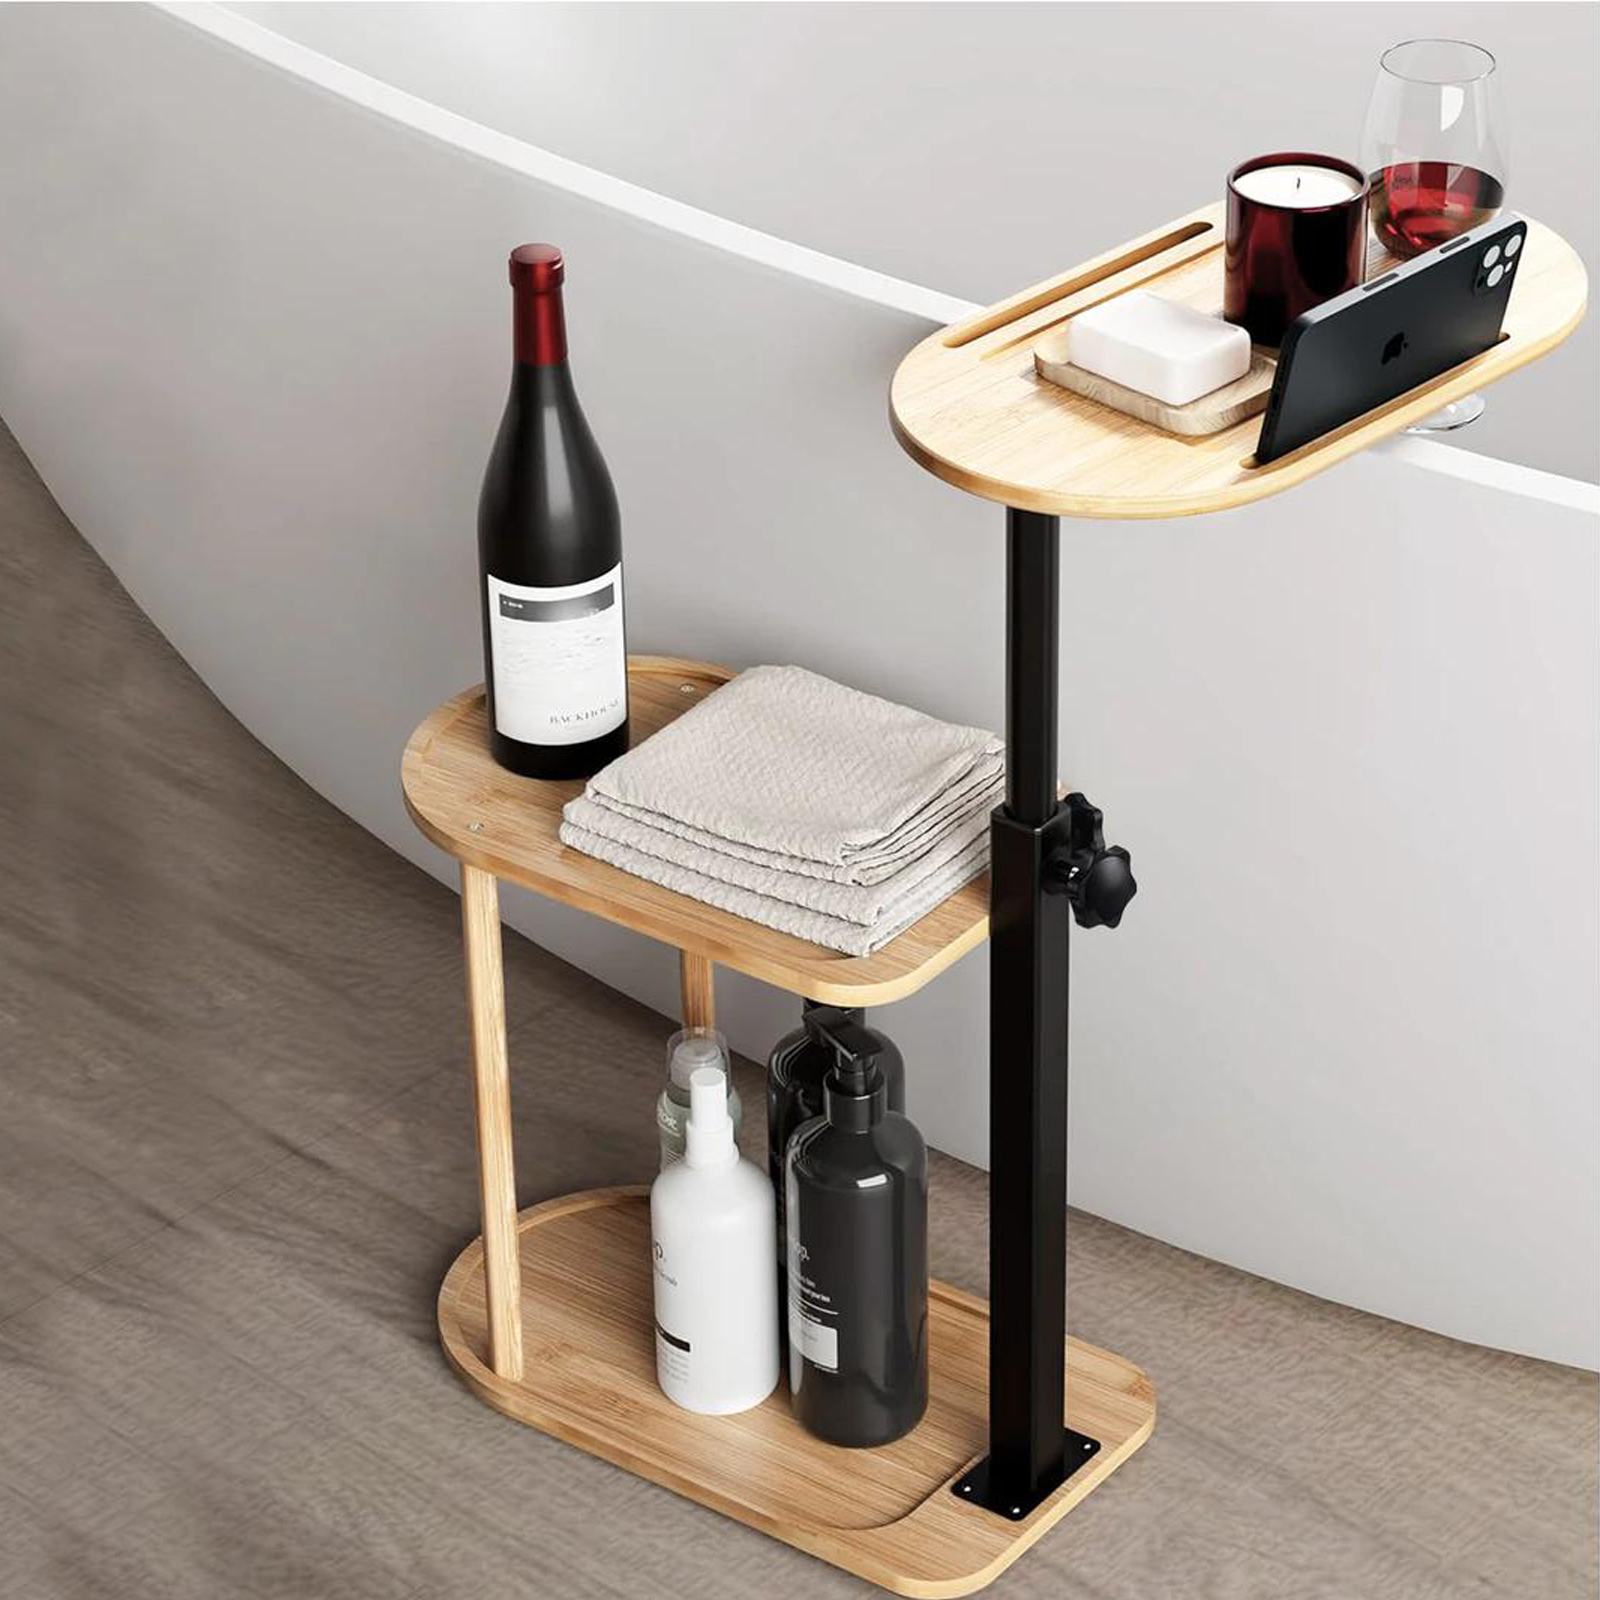 3 Tier Bamboo Side Table Bath Tub Tray Shower Caddy Phone Wineglass Holder Bed Stand Rotatable Holder Shelf